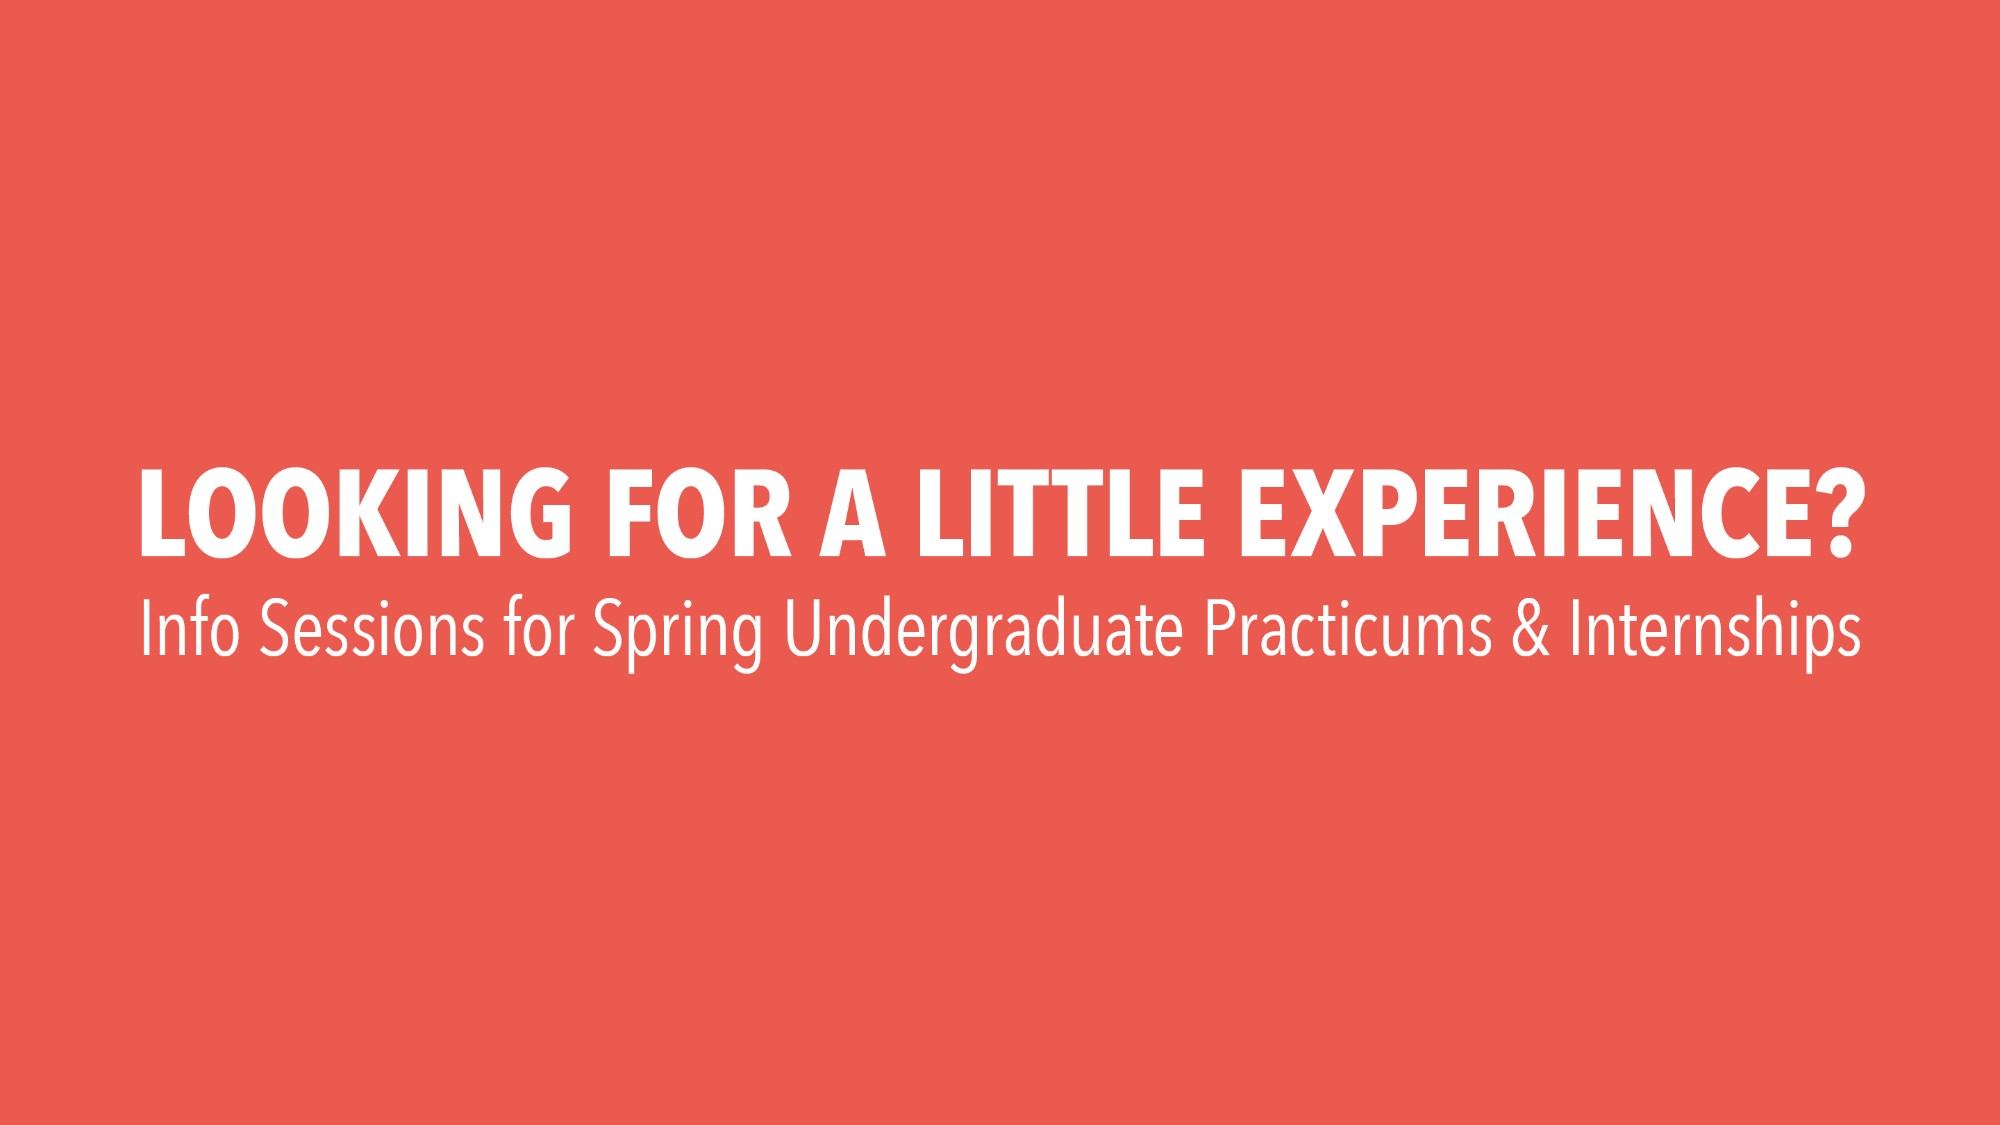 Info Sessions for Spring Undergraduate Practicums and Internships 